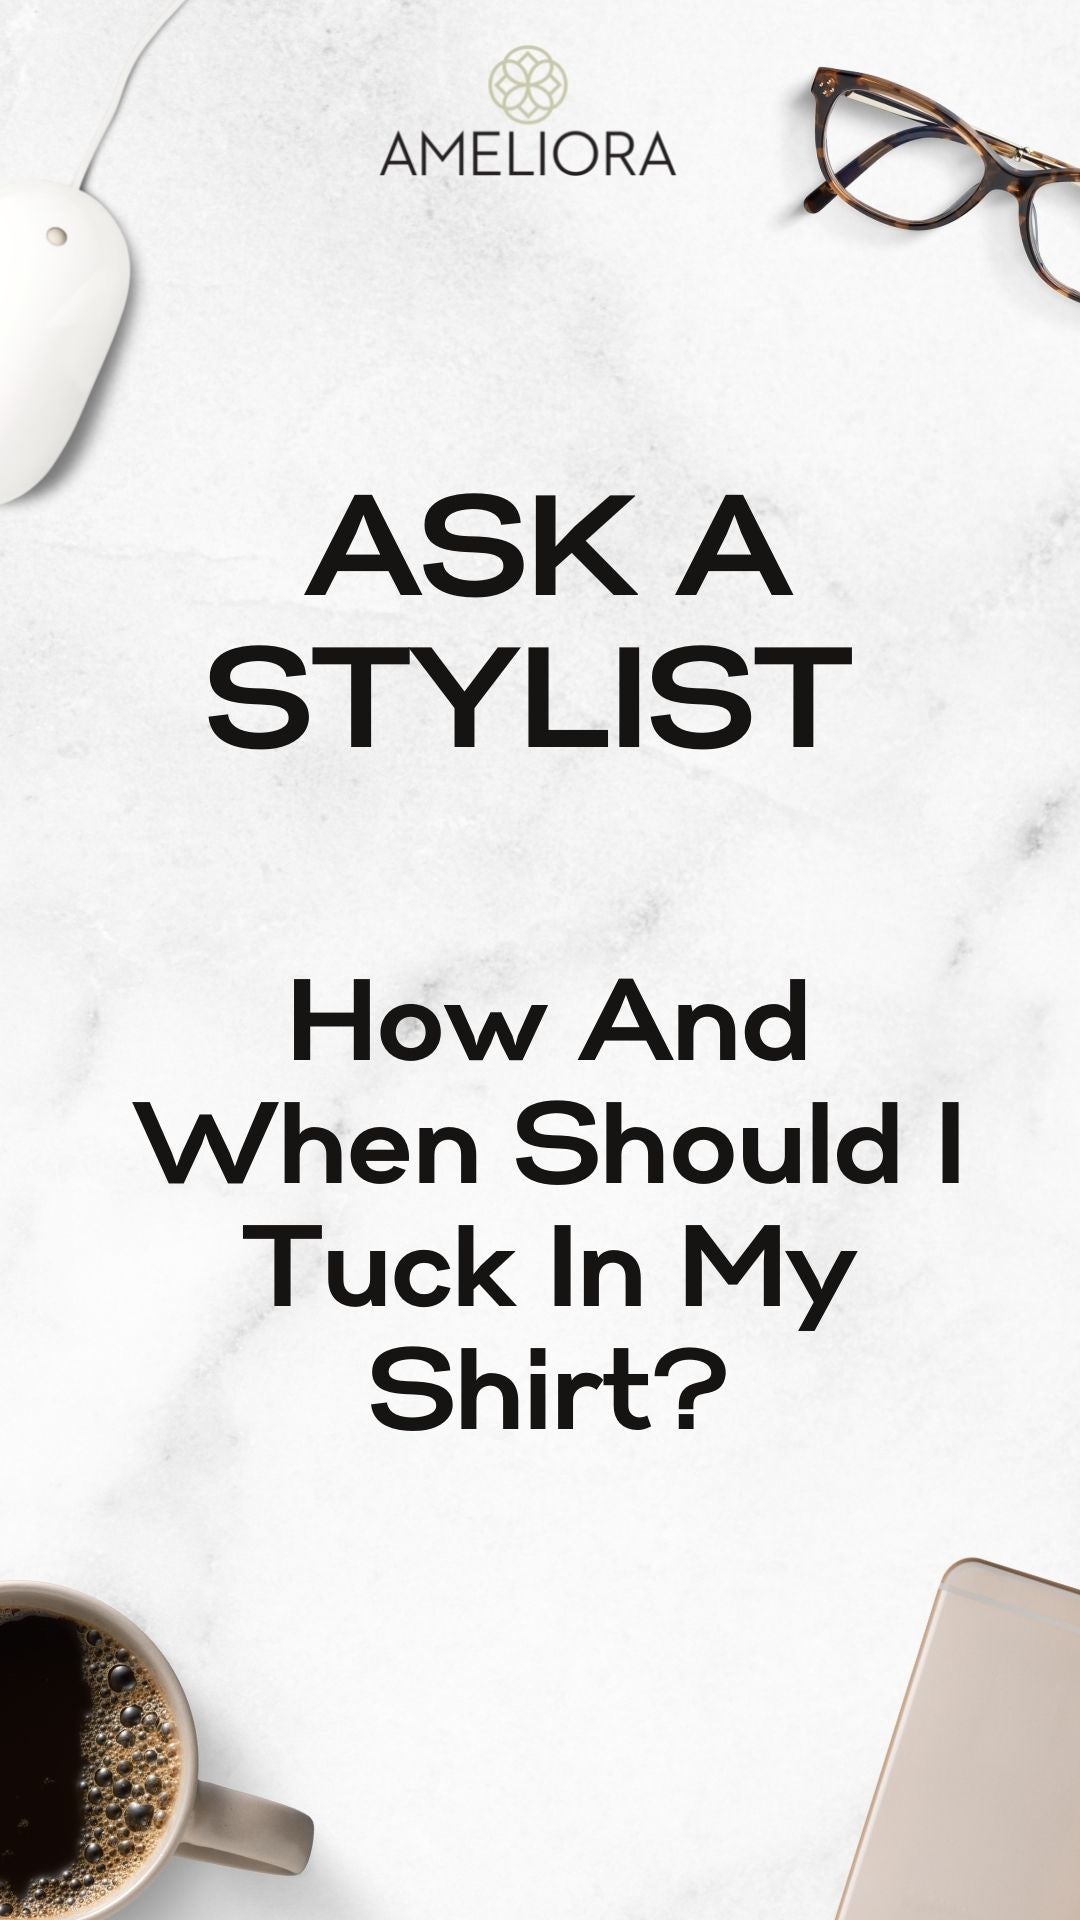 When Should I Tuck In My Shirt?